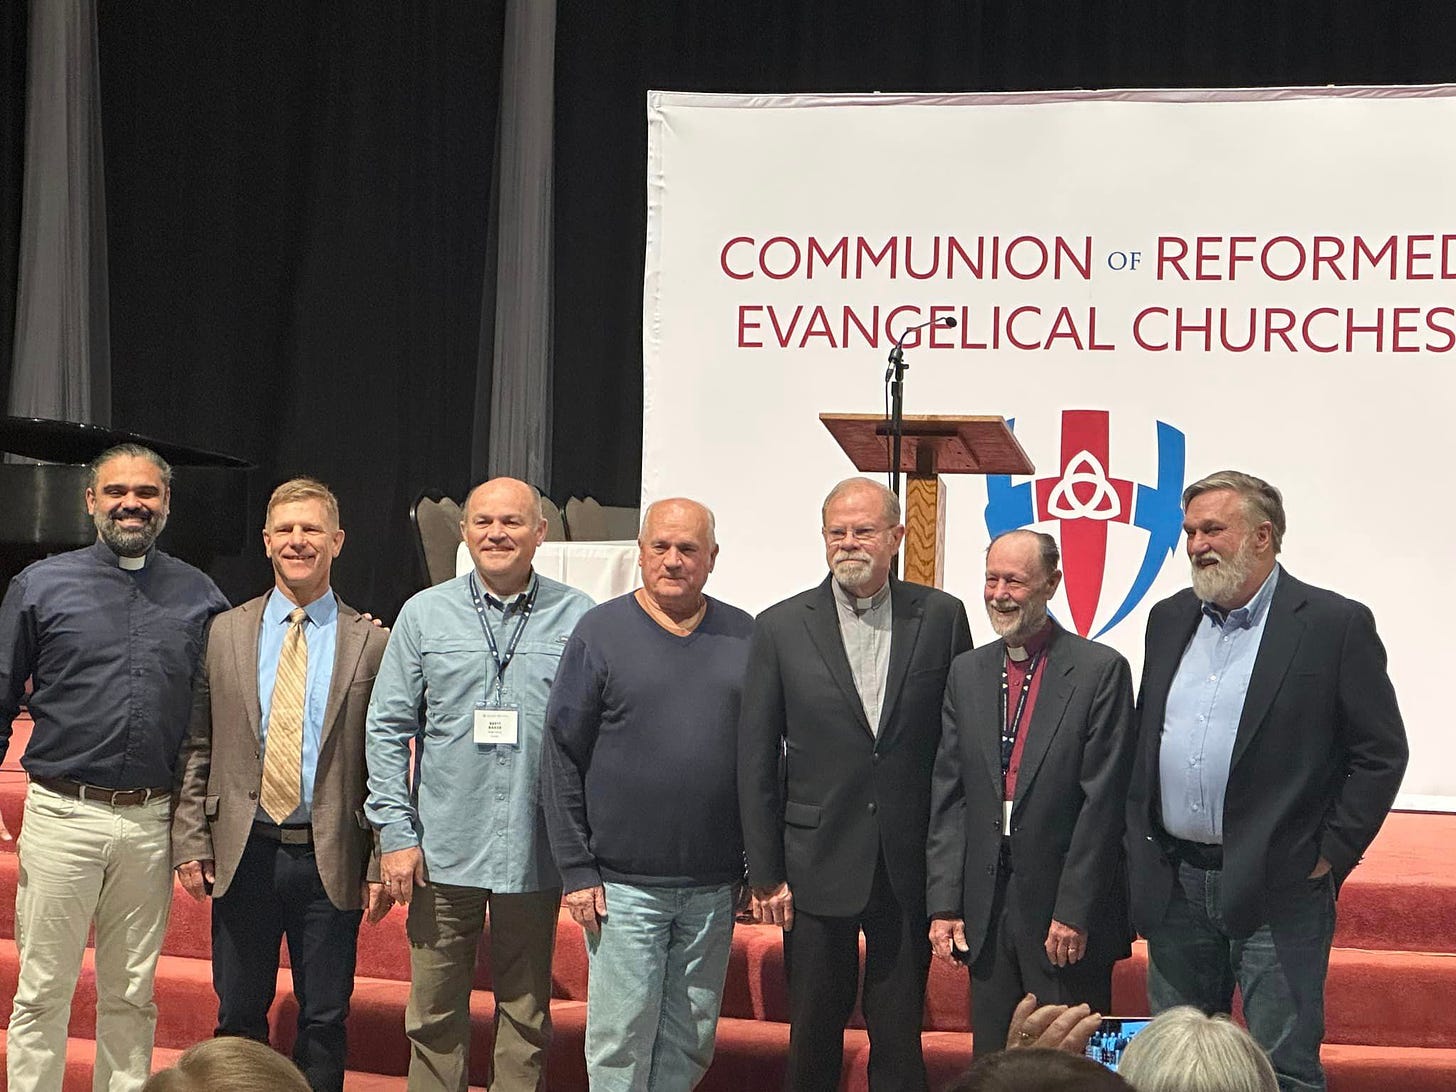 May be an image of 7 people and text that says 'COMMUNION OF REFORME EVANGELICAL CHURCHES'